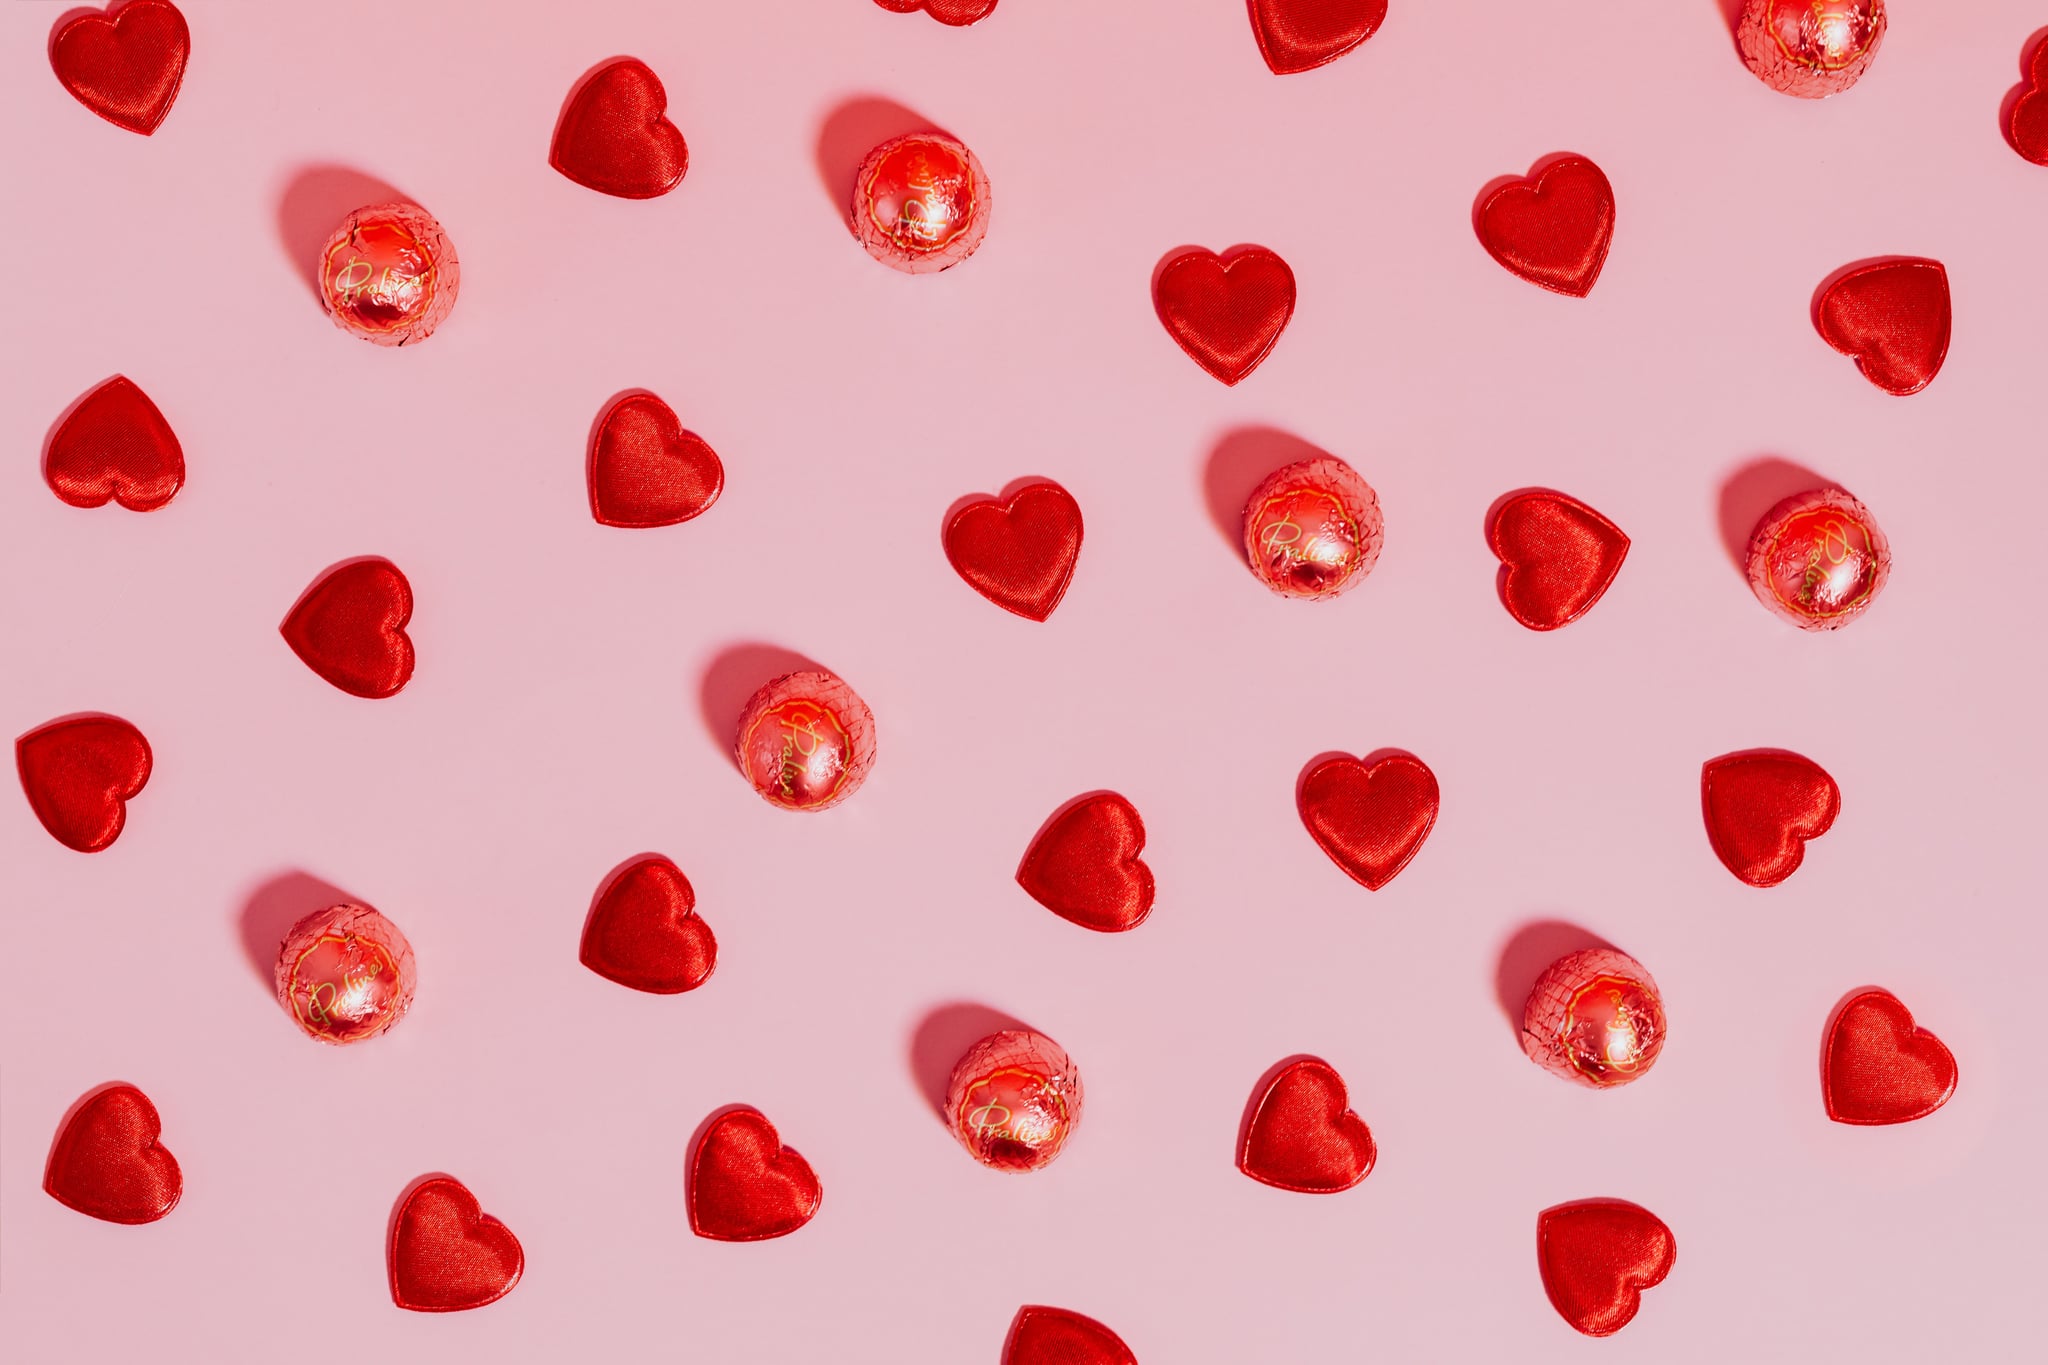 virtual backgrounds for zoom valentines day